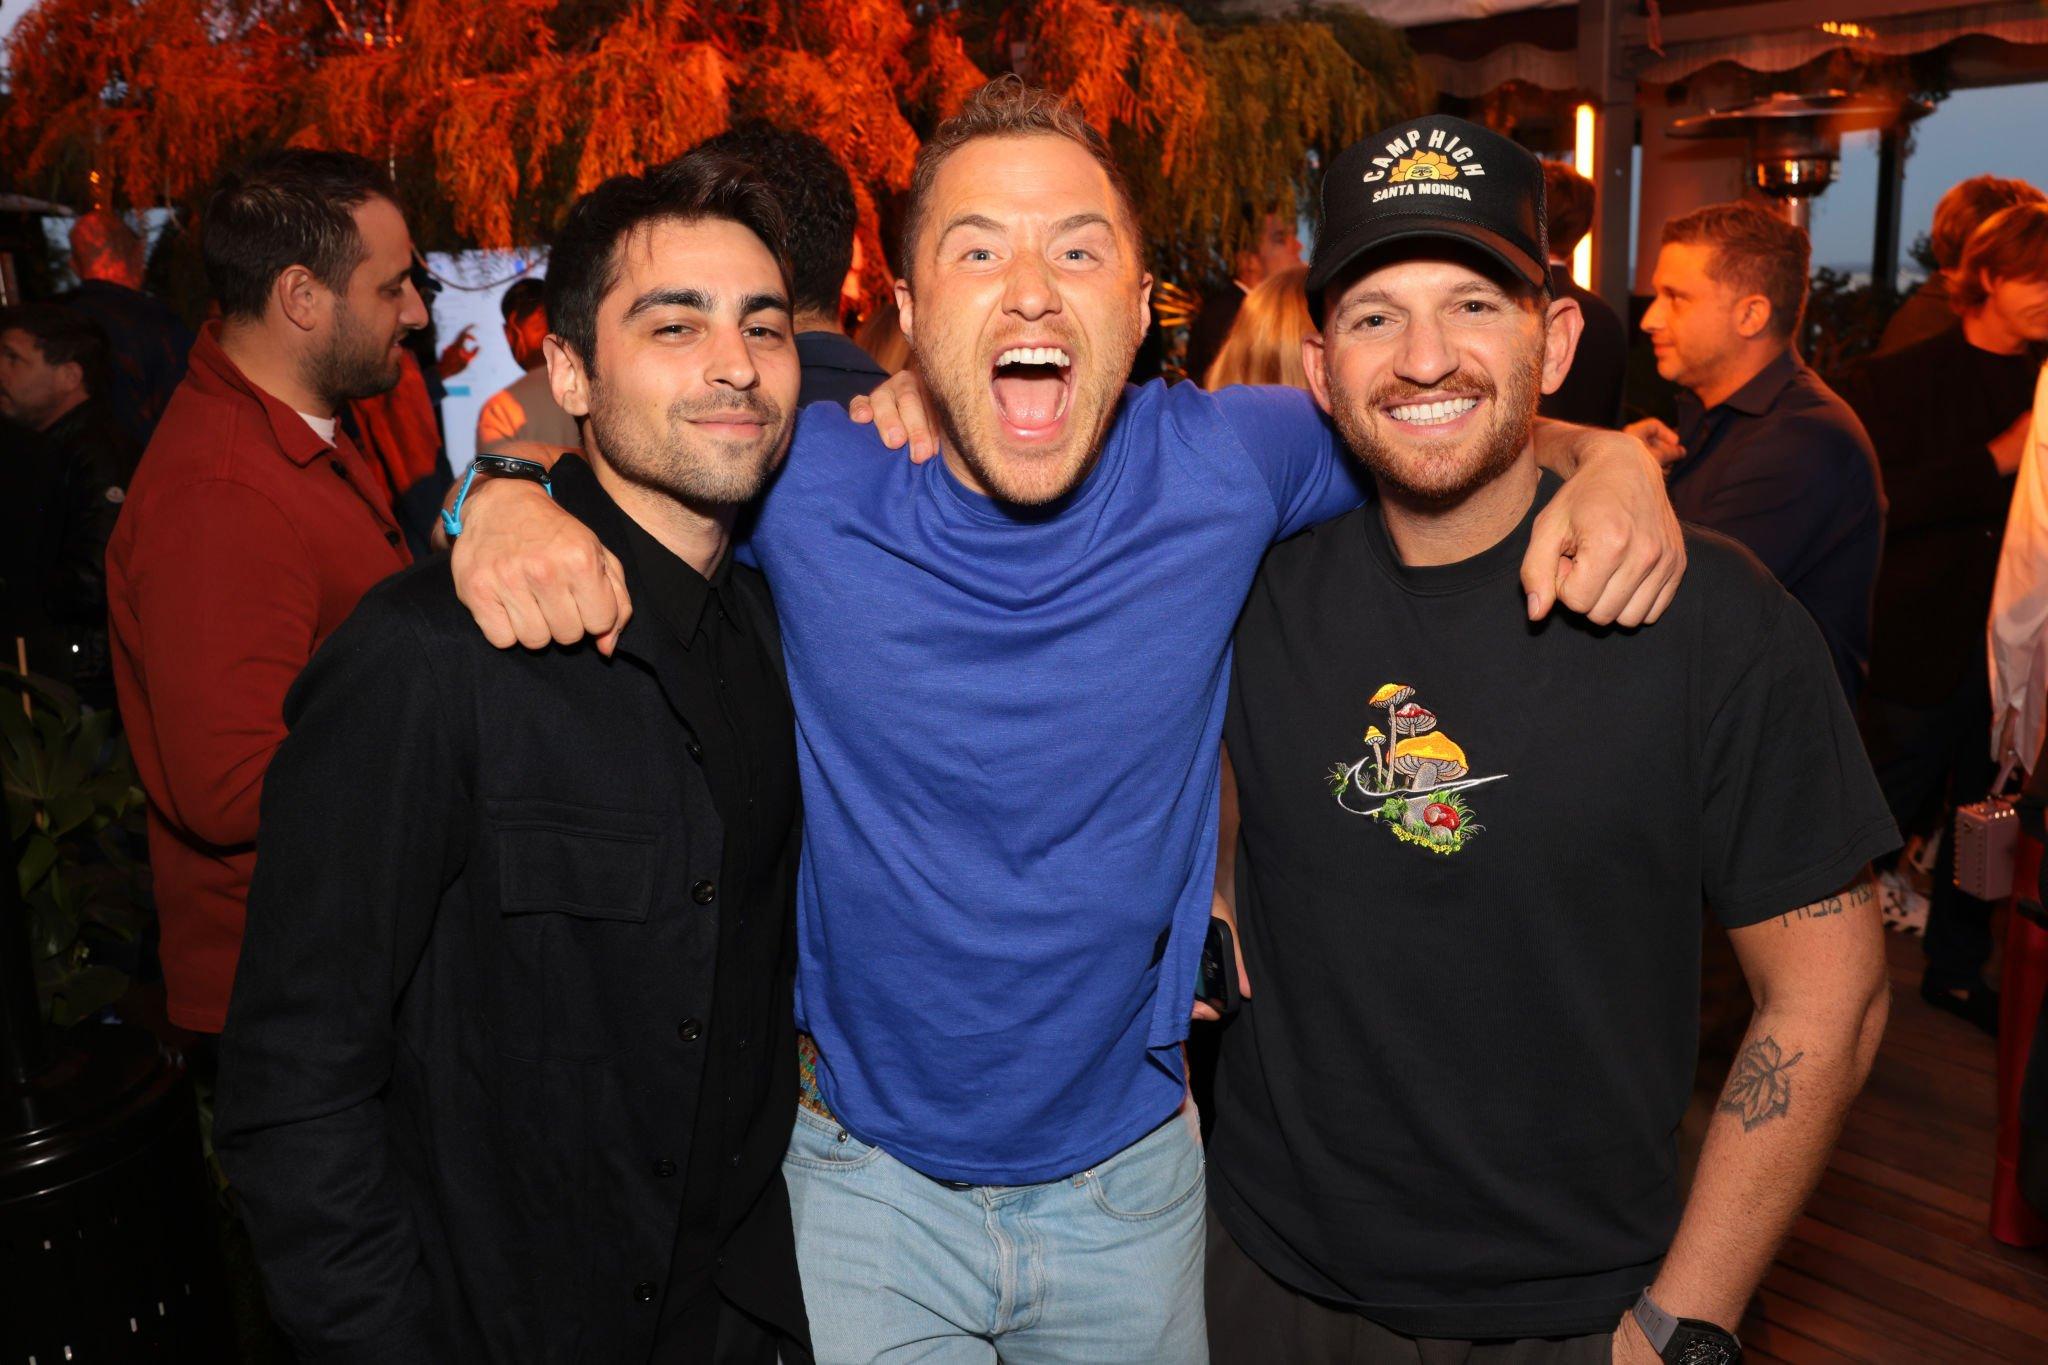 Milo Frank, Mike Posner, and friend
